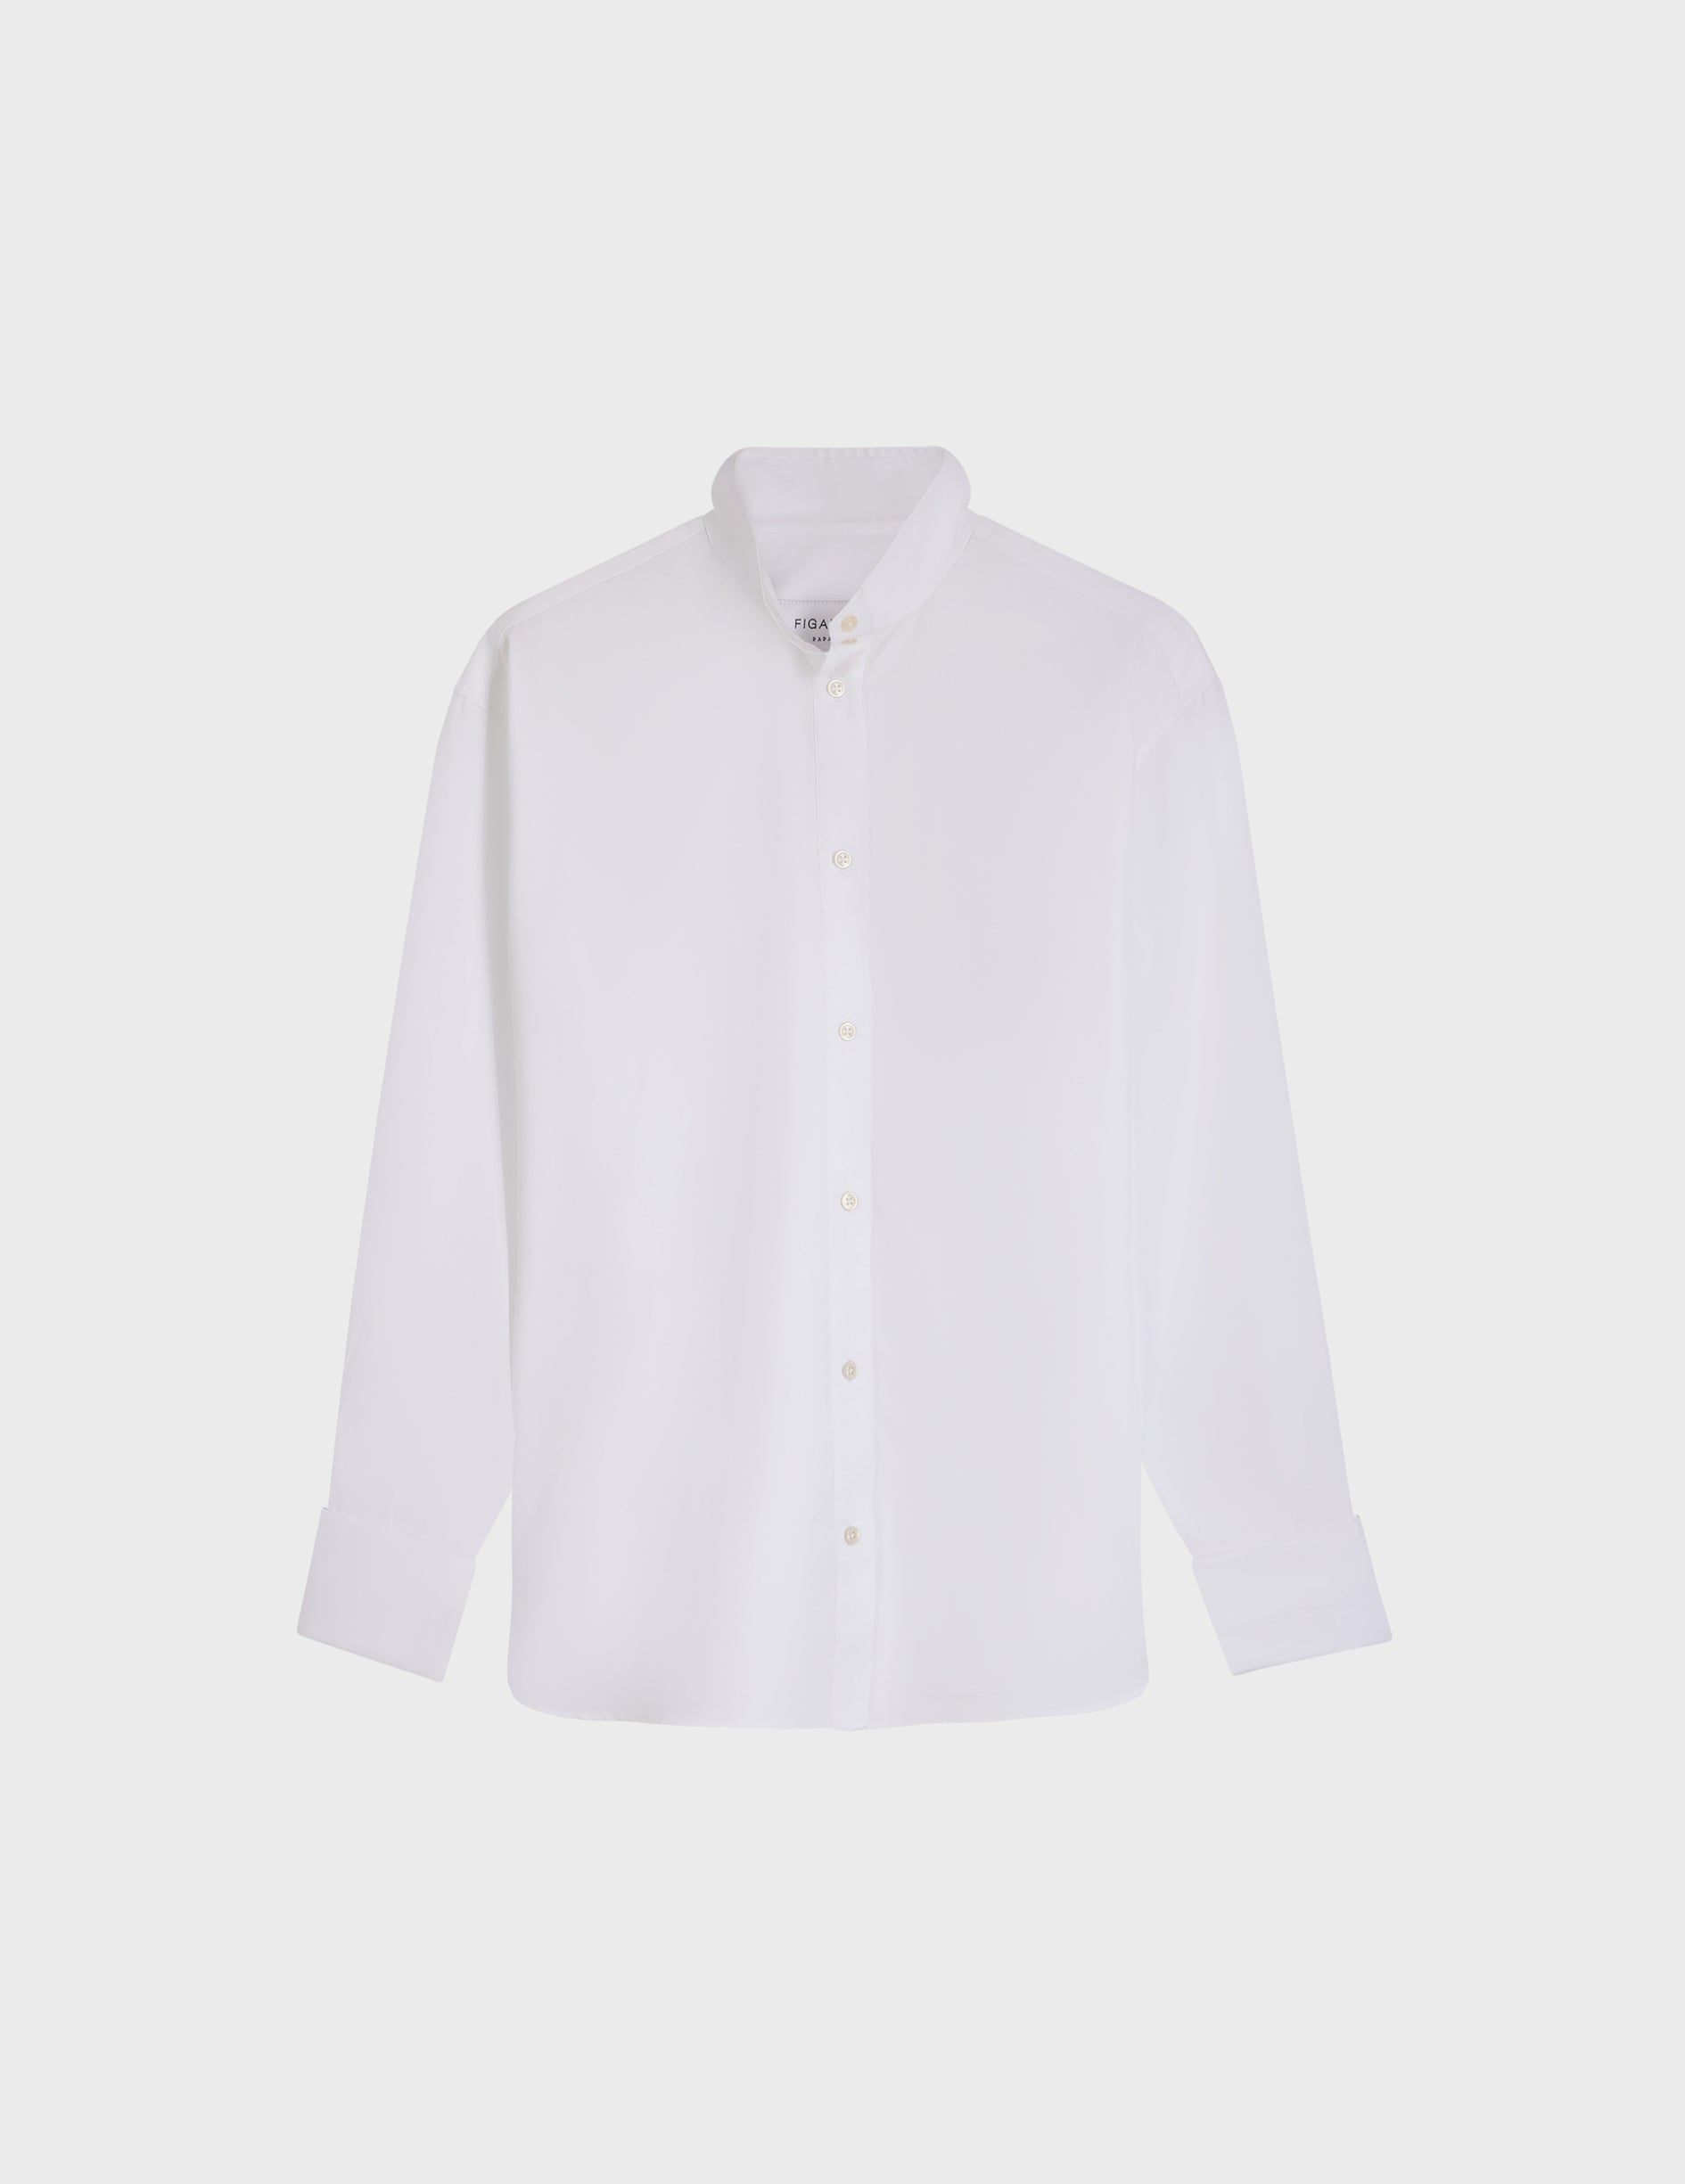 Chemise Gayanee blanche - Popeline - Poignets Mousquetaires